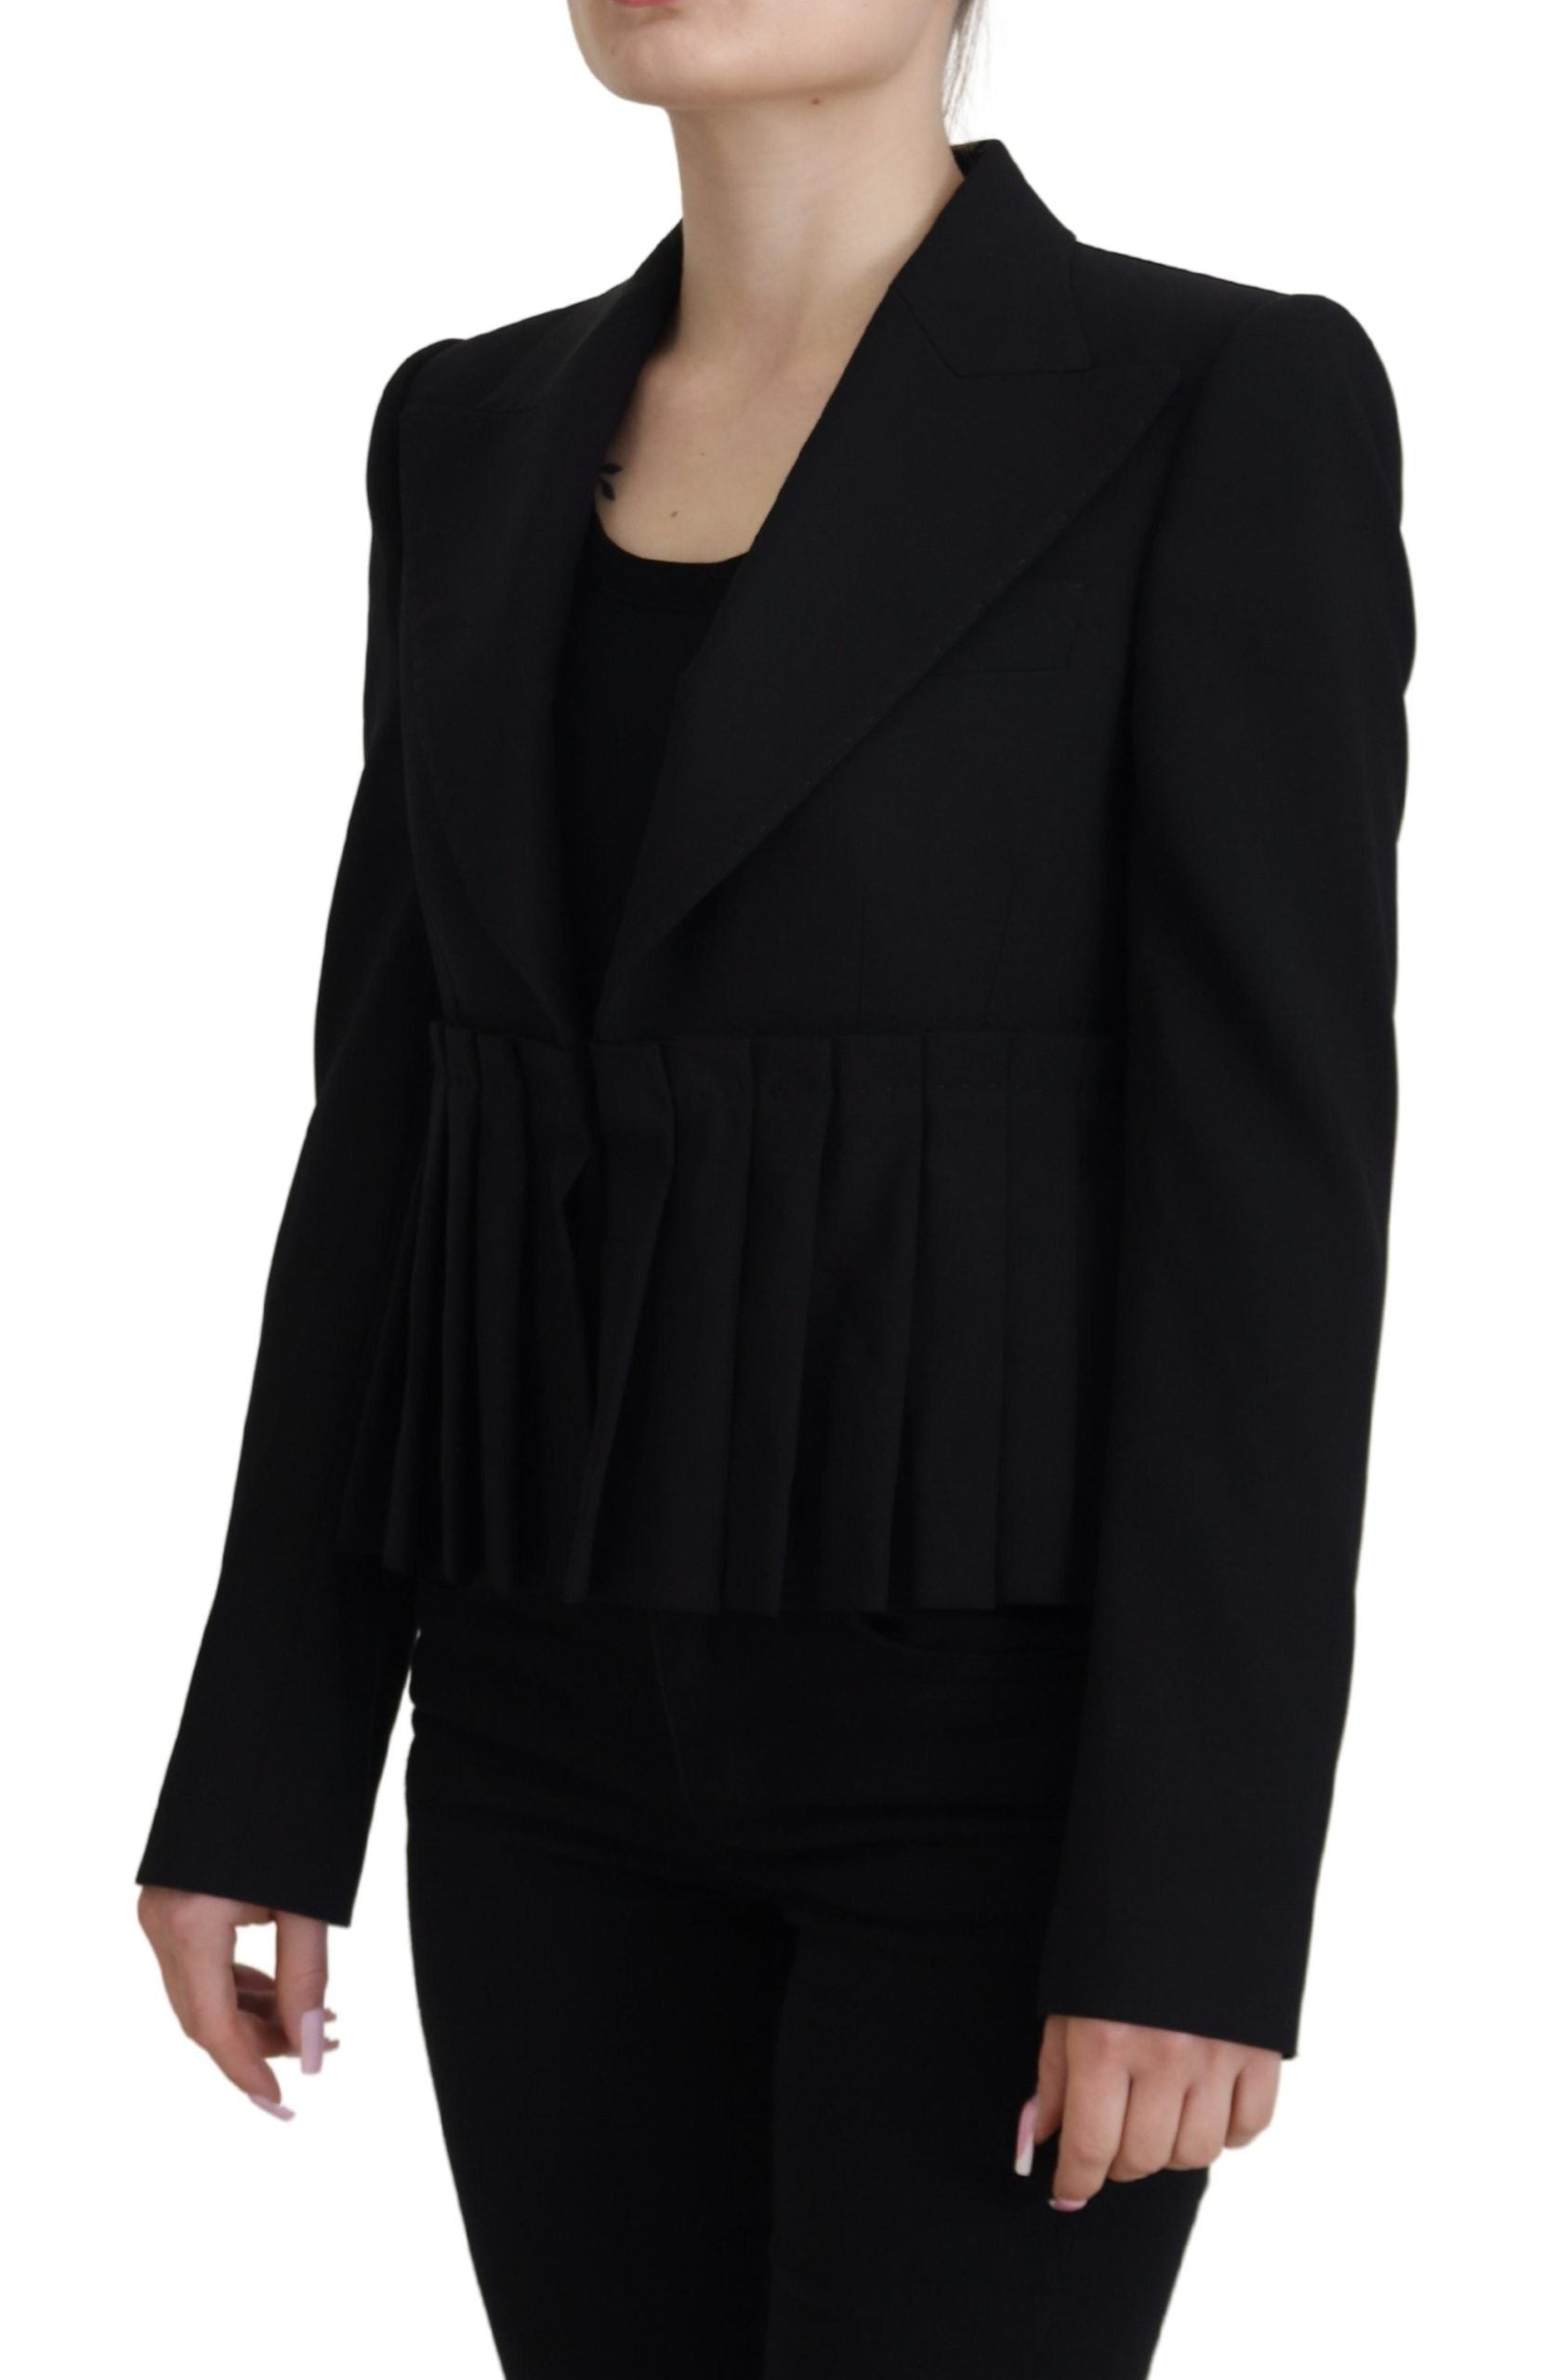 Dolce & Gabbana Black Single Breasted Fit Blazer Wool Jacket - Designed by Dolce & Gabbana Available to Buy at a Discounted Price on Moon Behind The Hill Online Designer Discount Store